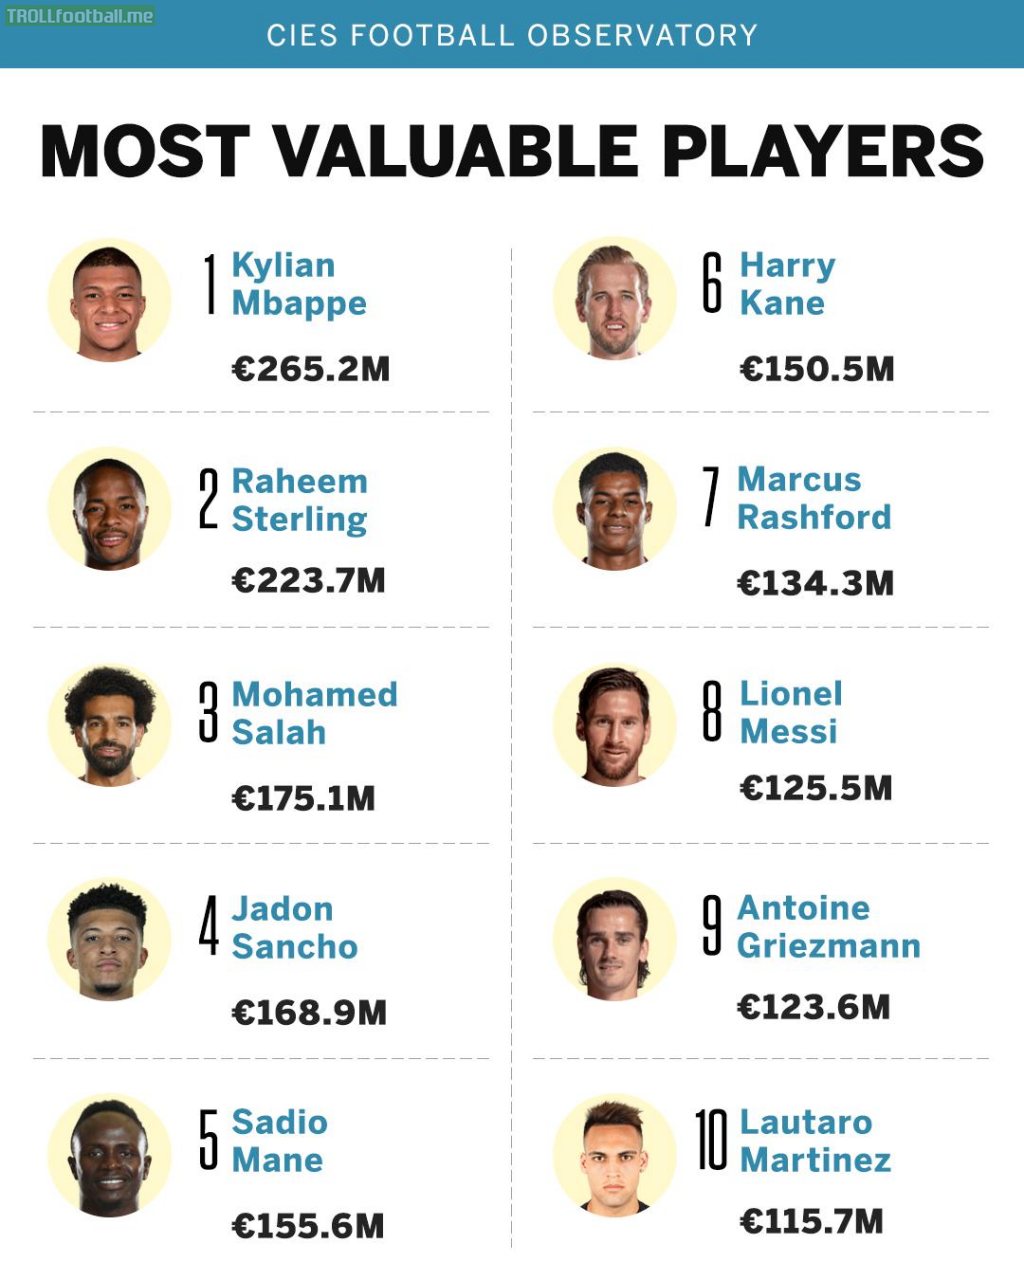 Here are the Top 10 most valuable footballers in the world according to the CIES Football Observatory [source ESPN]